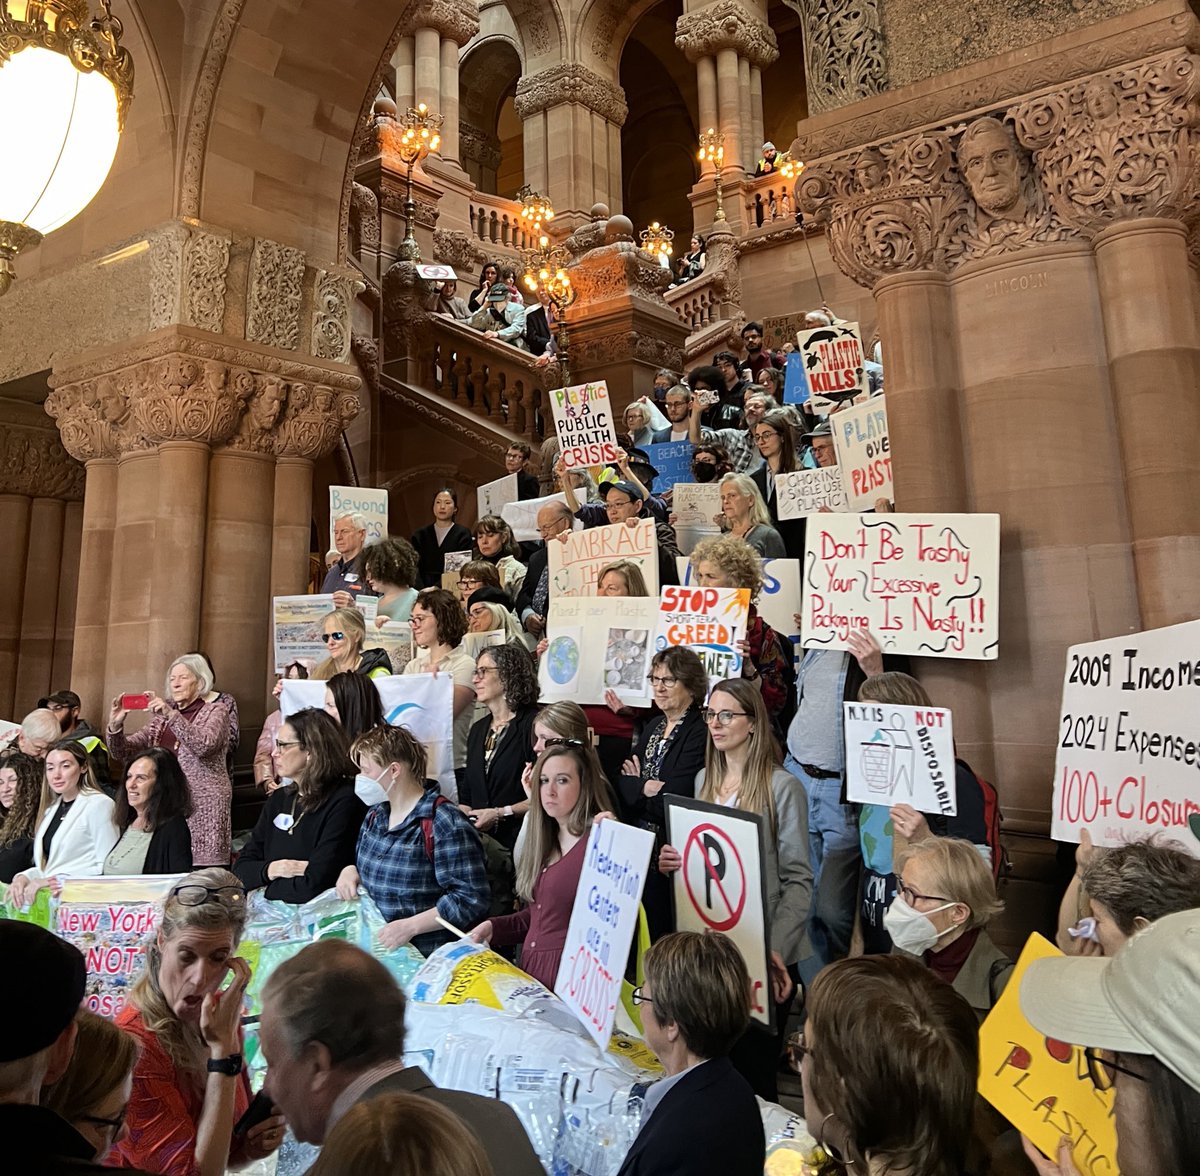 Amazing rally today for the Packaging Reduction Act and the Bigger Better Bottle Bill! We also got the chance to speak with @CarlHeastie’s office and push to bring the Packaging Reduction Act to the floor. NY is not disposable and we’re going to keep fighting for it 💪🏽💙